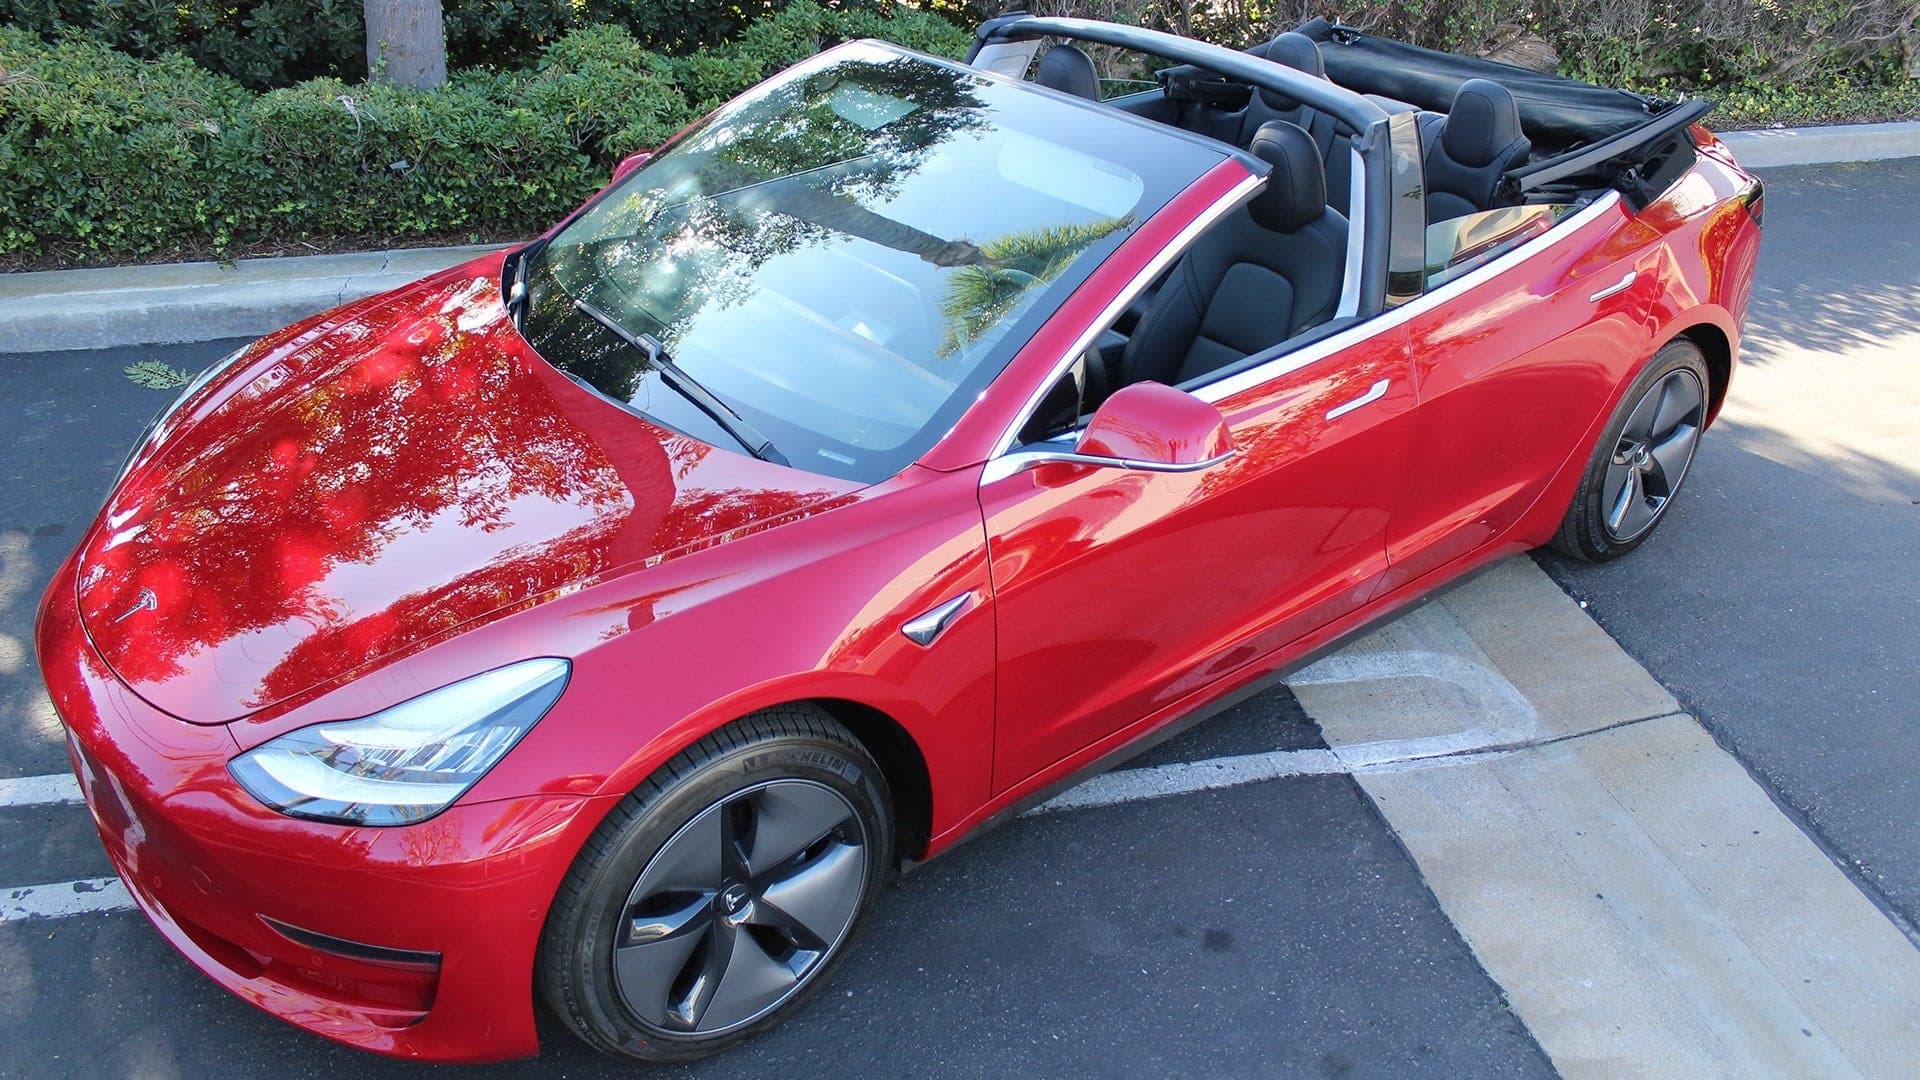 Nobody Asked for a Tesla Model 3 Convertible, But Here’s One Anyway